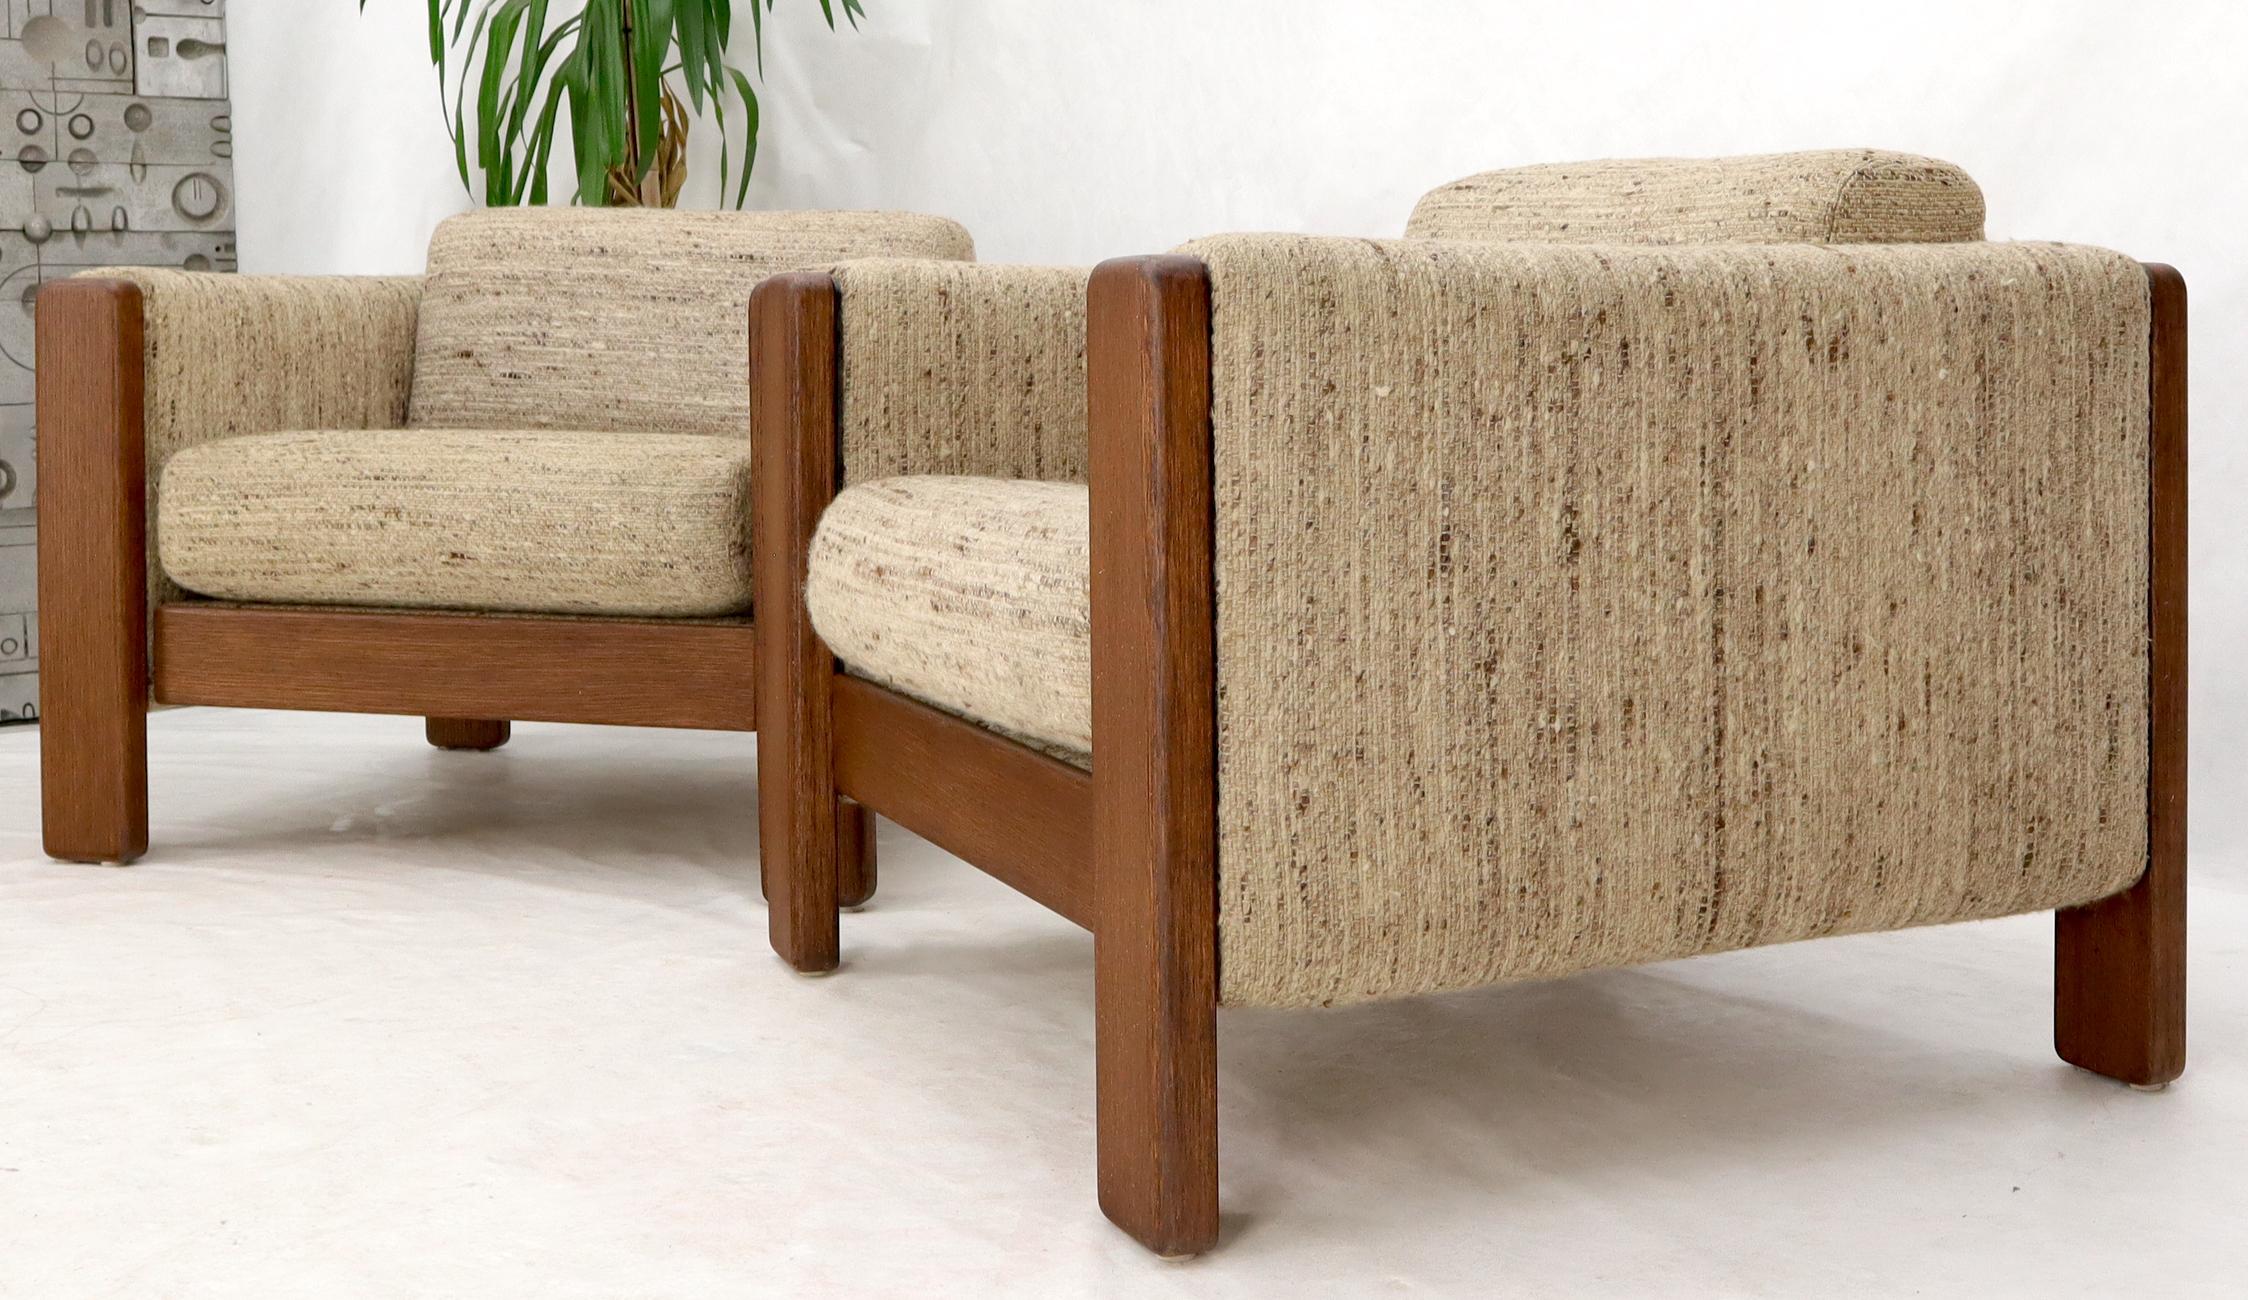 Pair or mid century Danish modern cube shape virgin wood upholstery lounge chairs by Knoll.